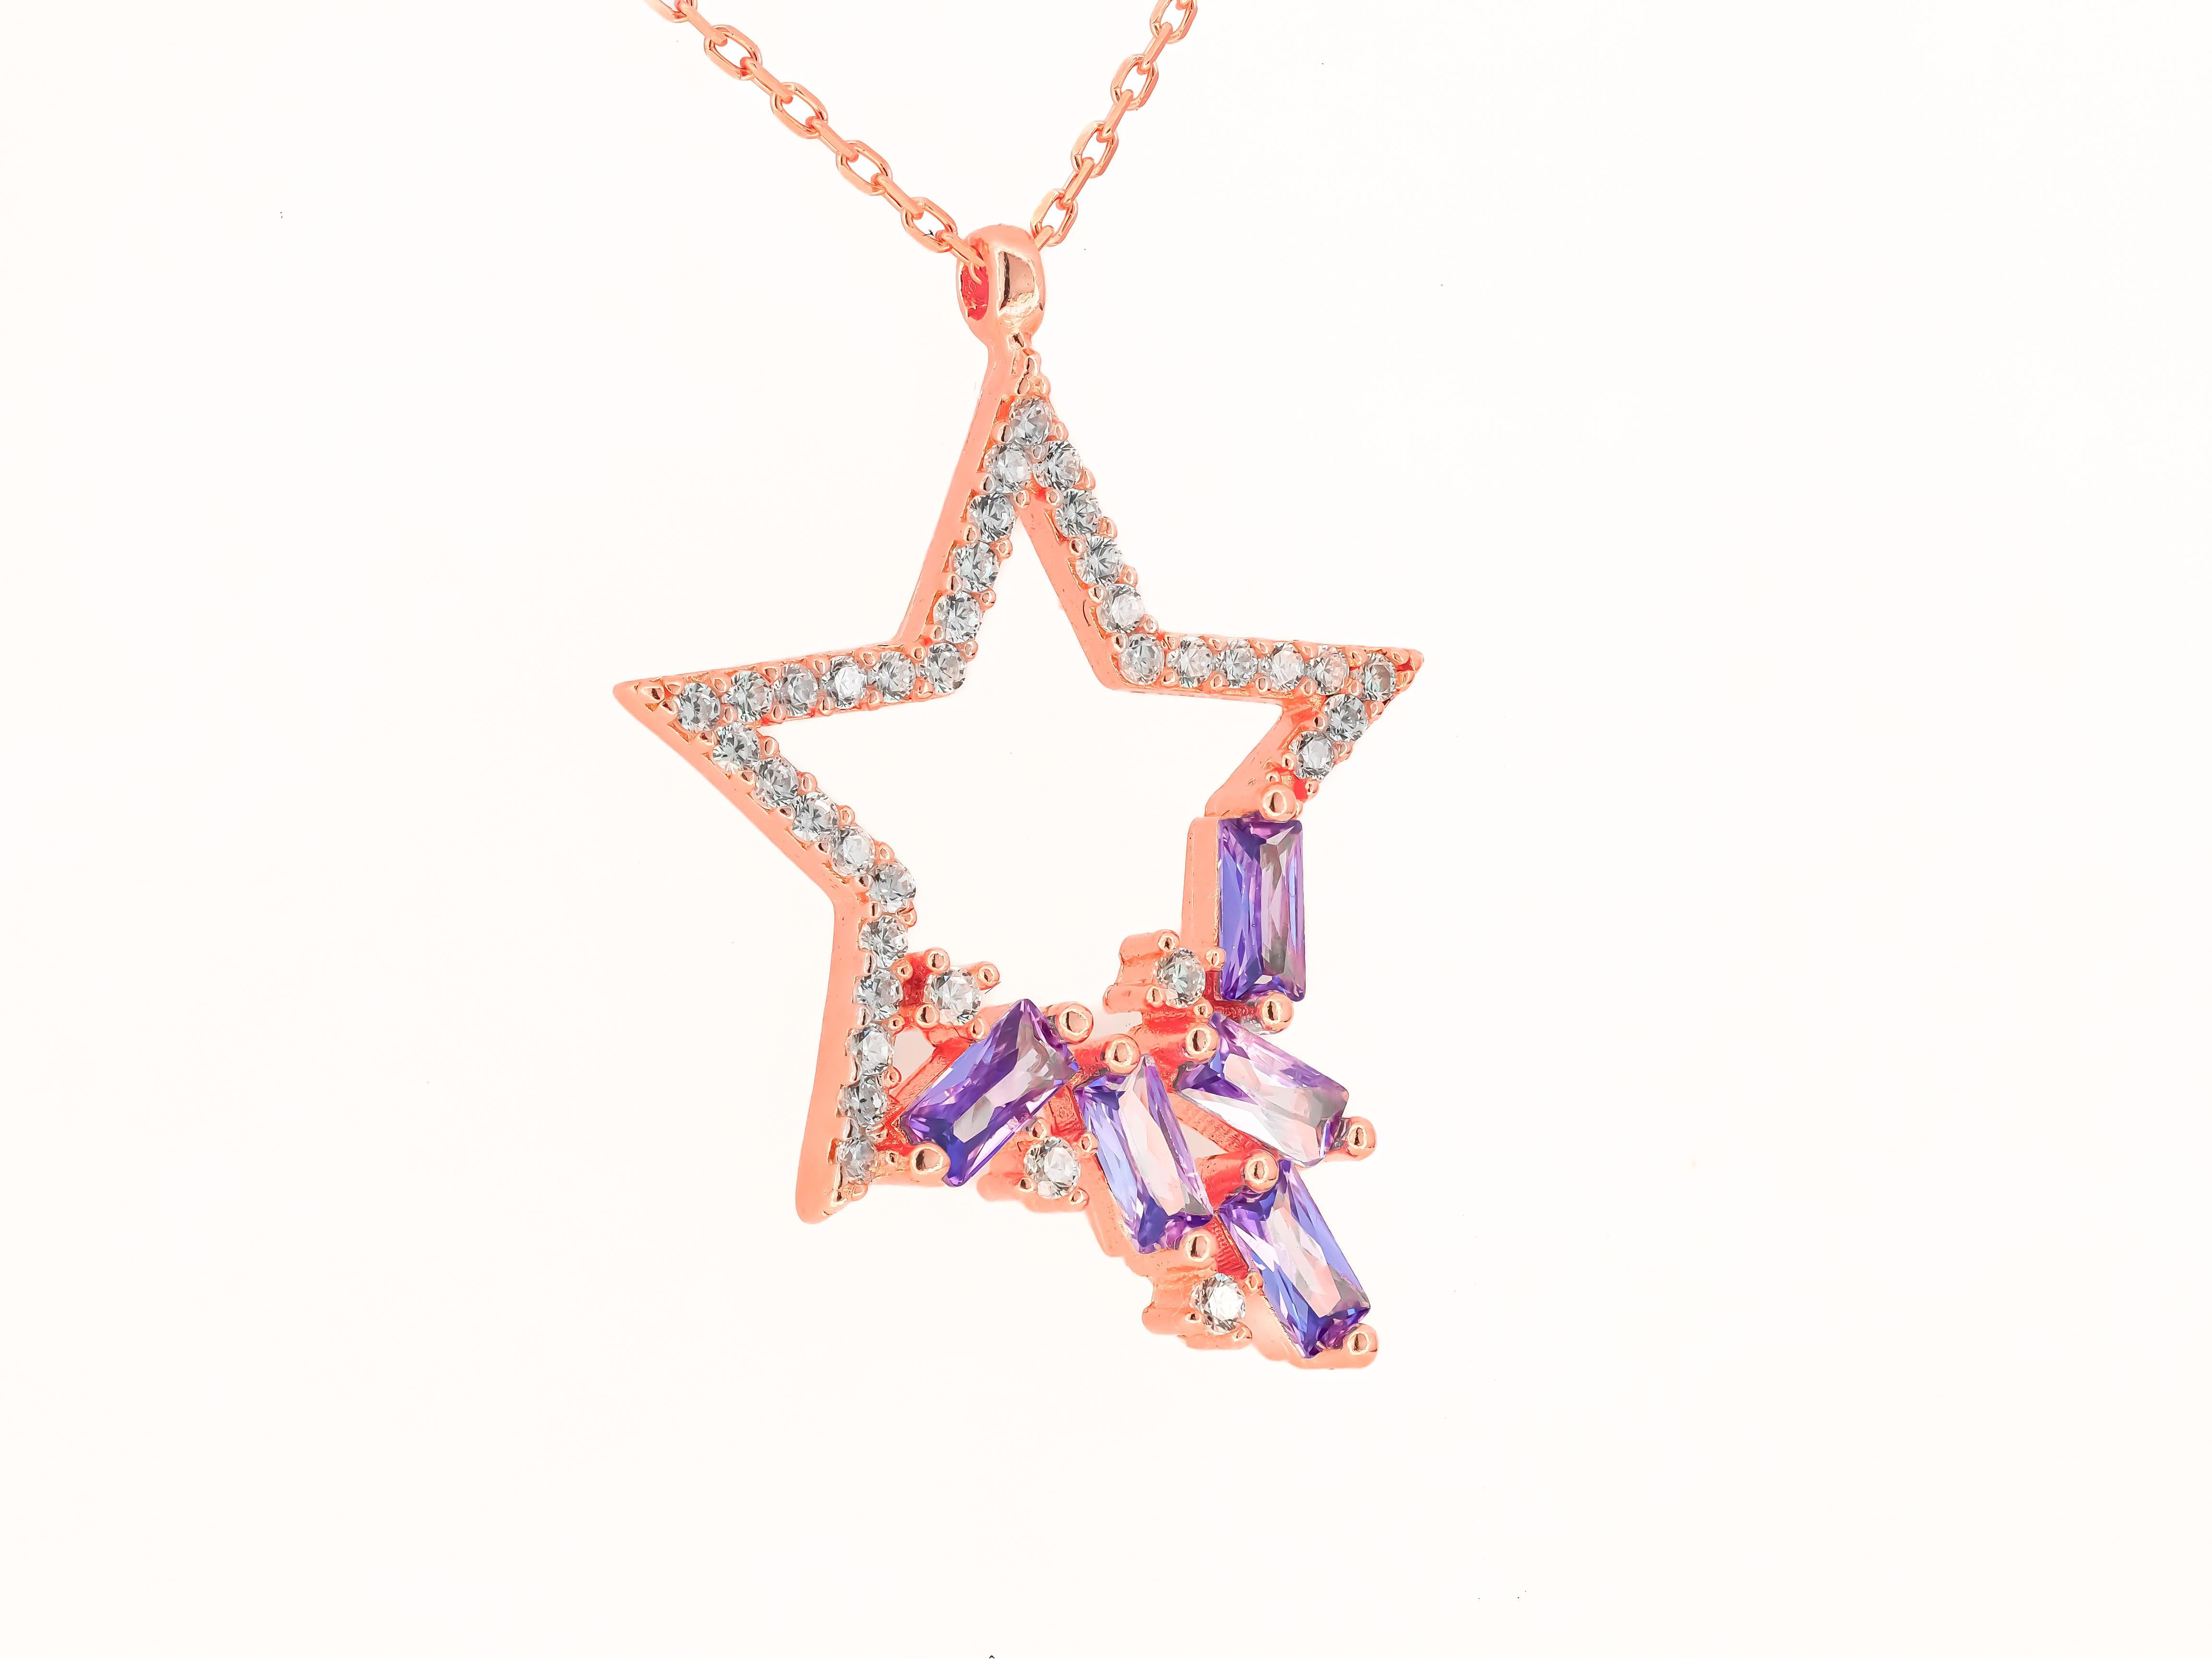 Modern Star pendant necklace with diamonds and amethysts in 14k gold. 